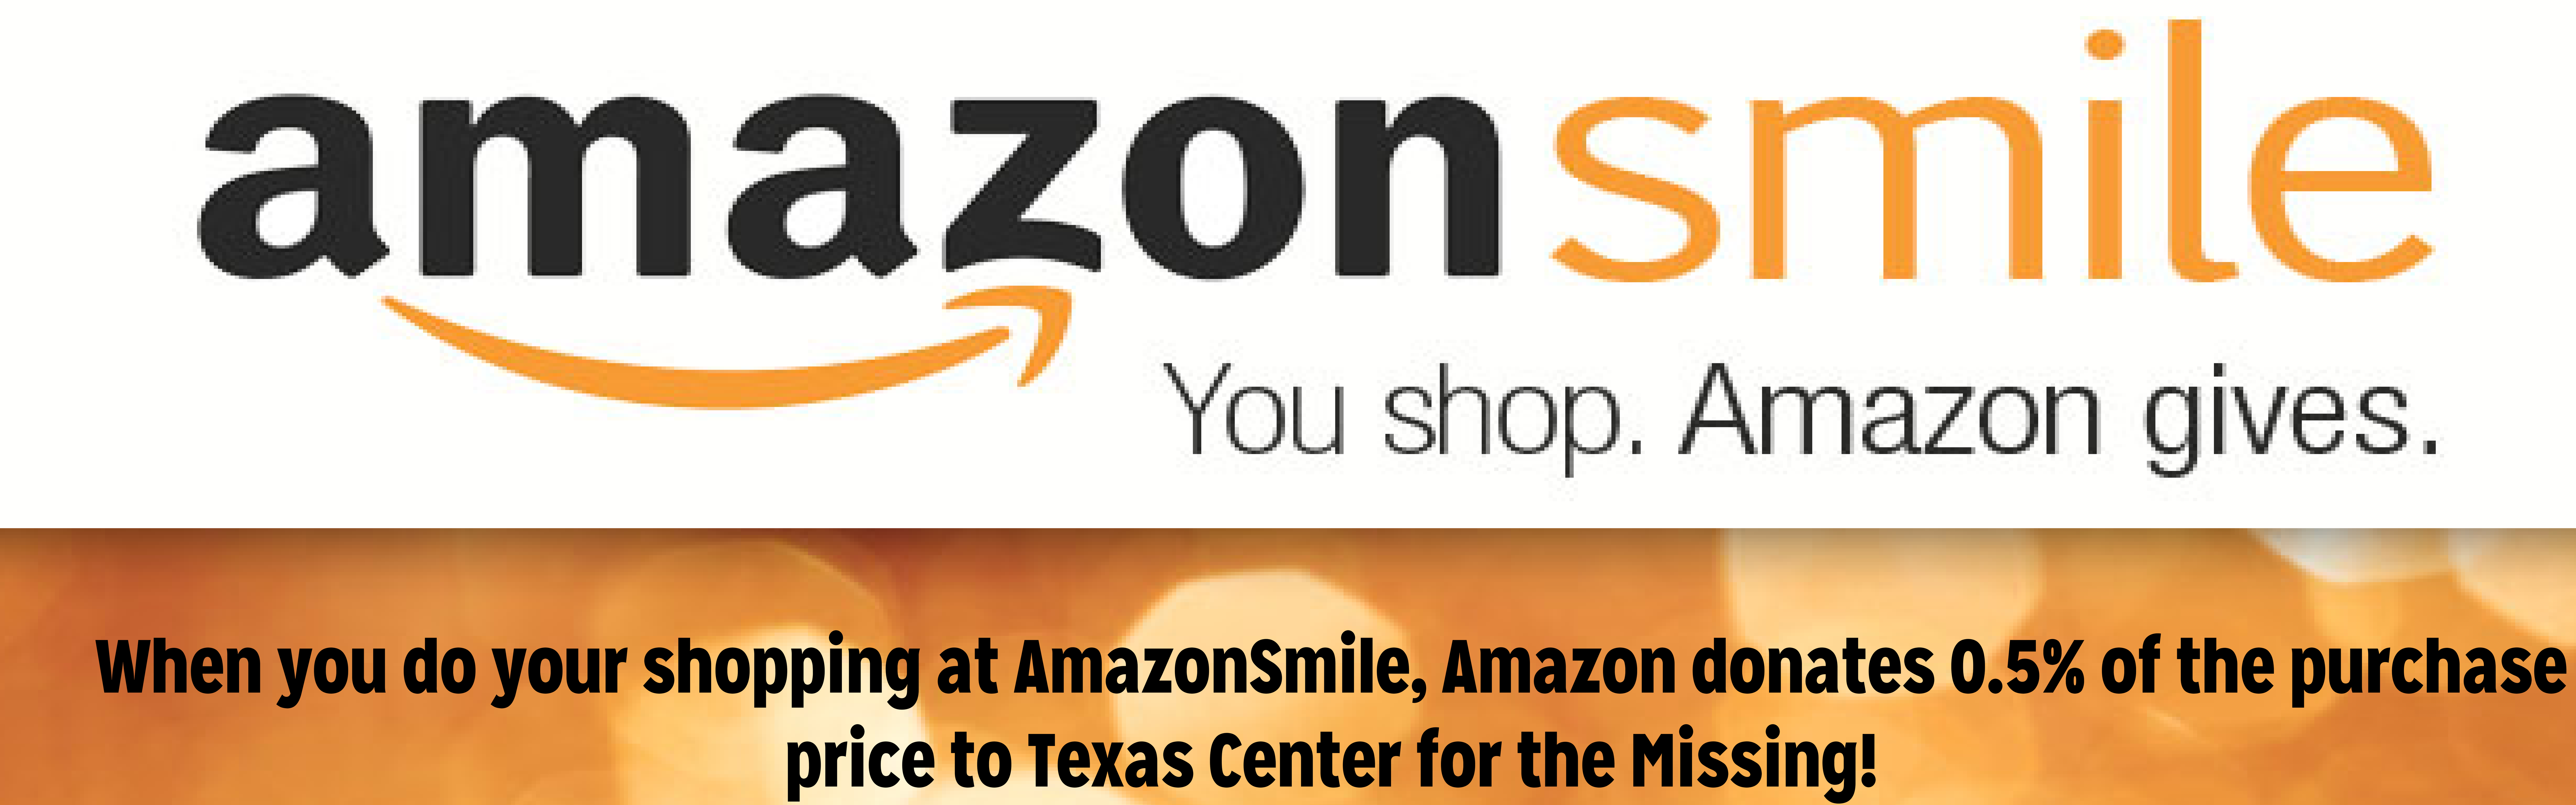 Shop via AmazonSmile and .5% of your purchase will be donated to Texas Center for the Missing.